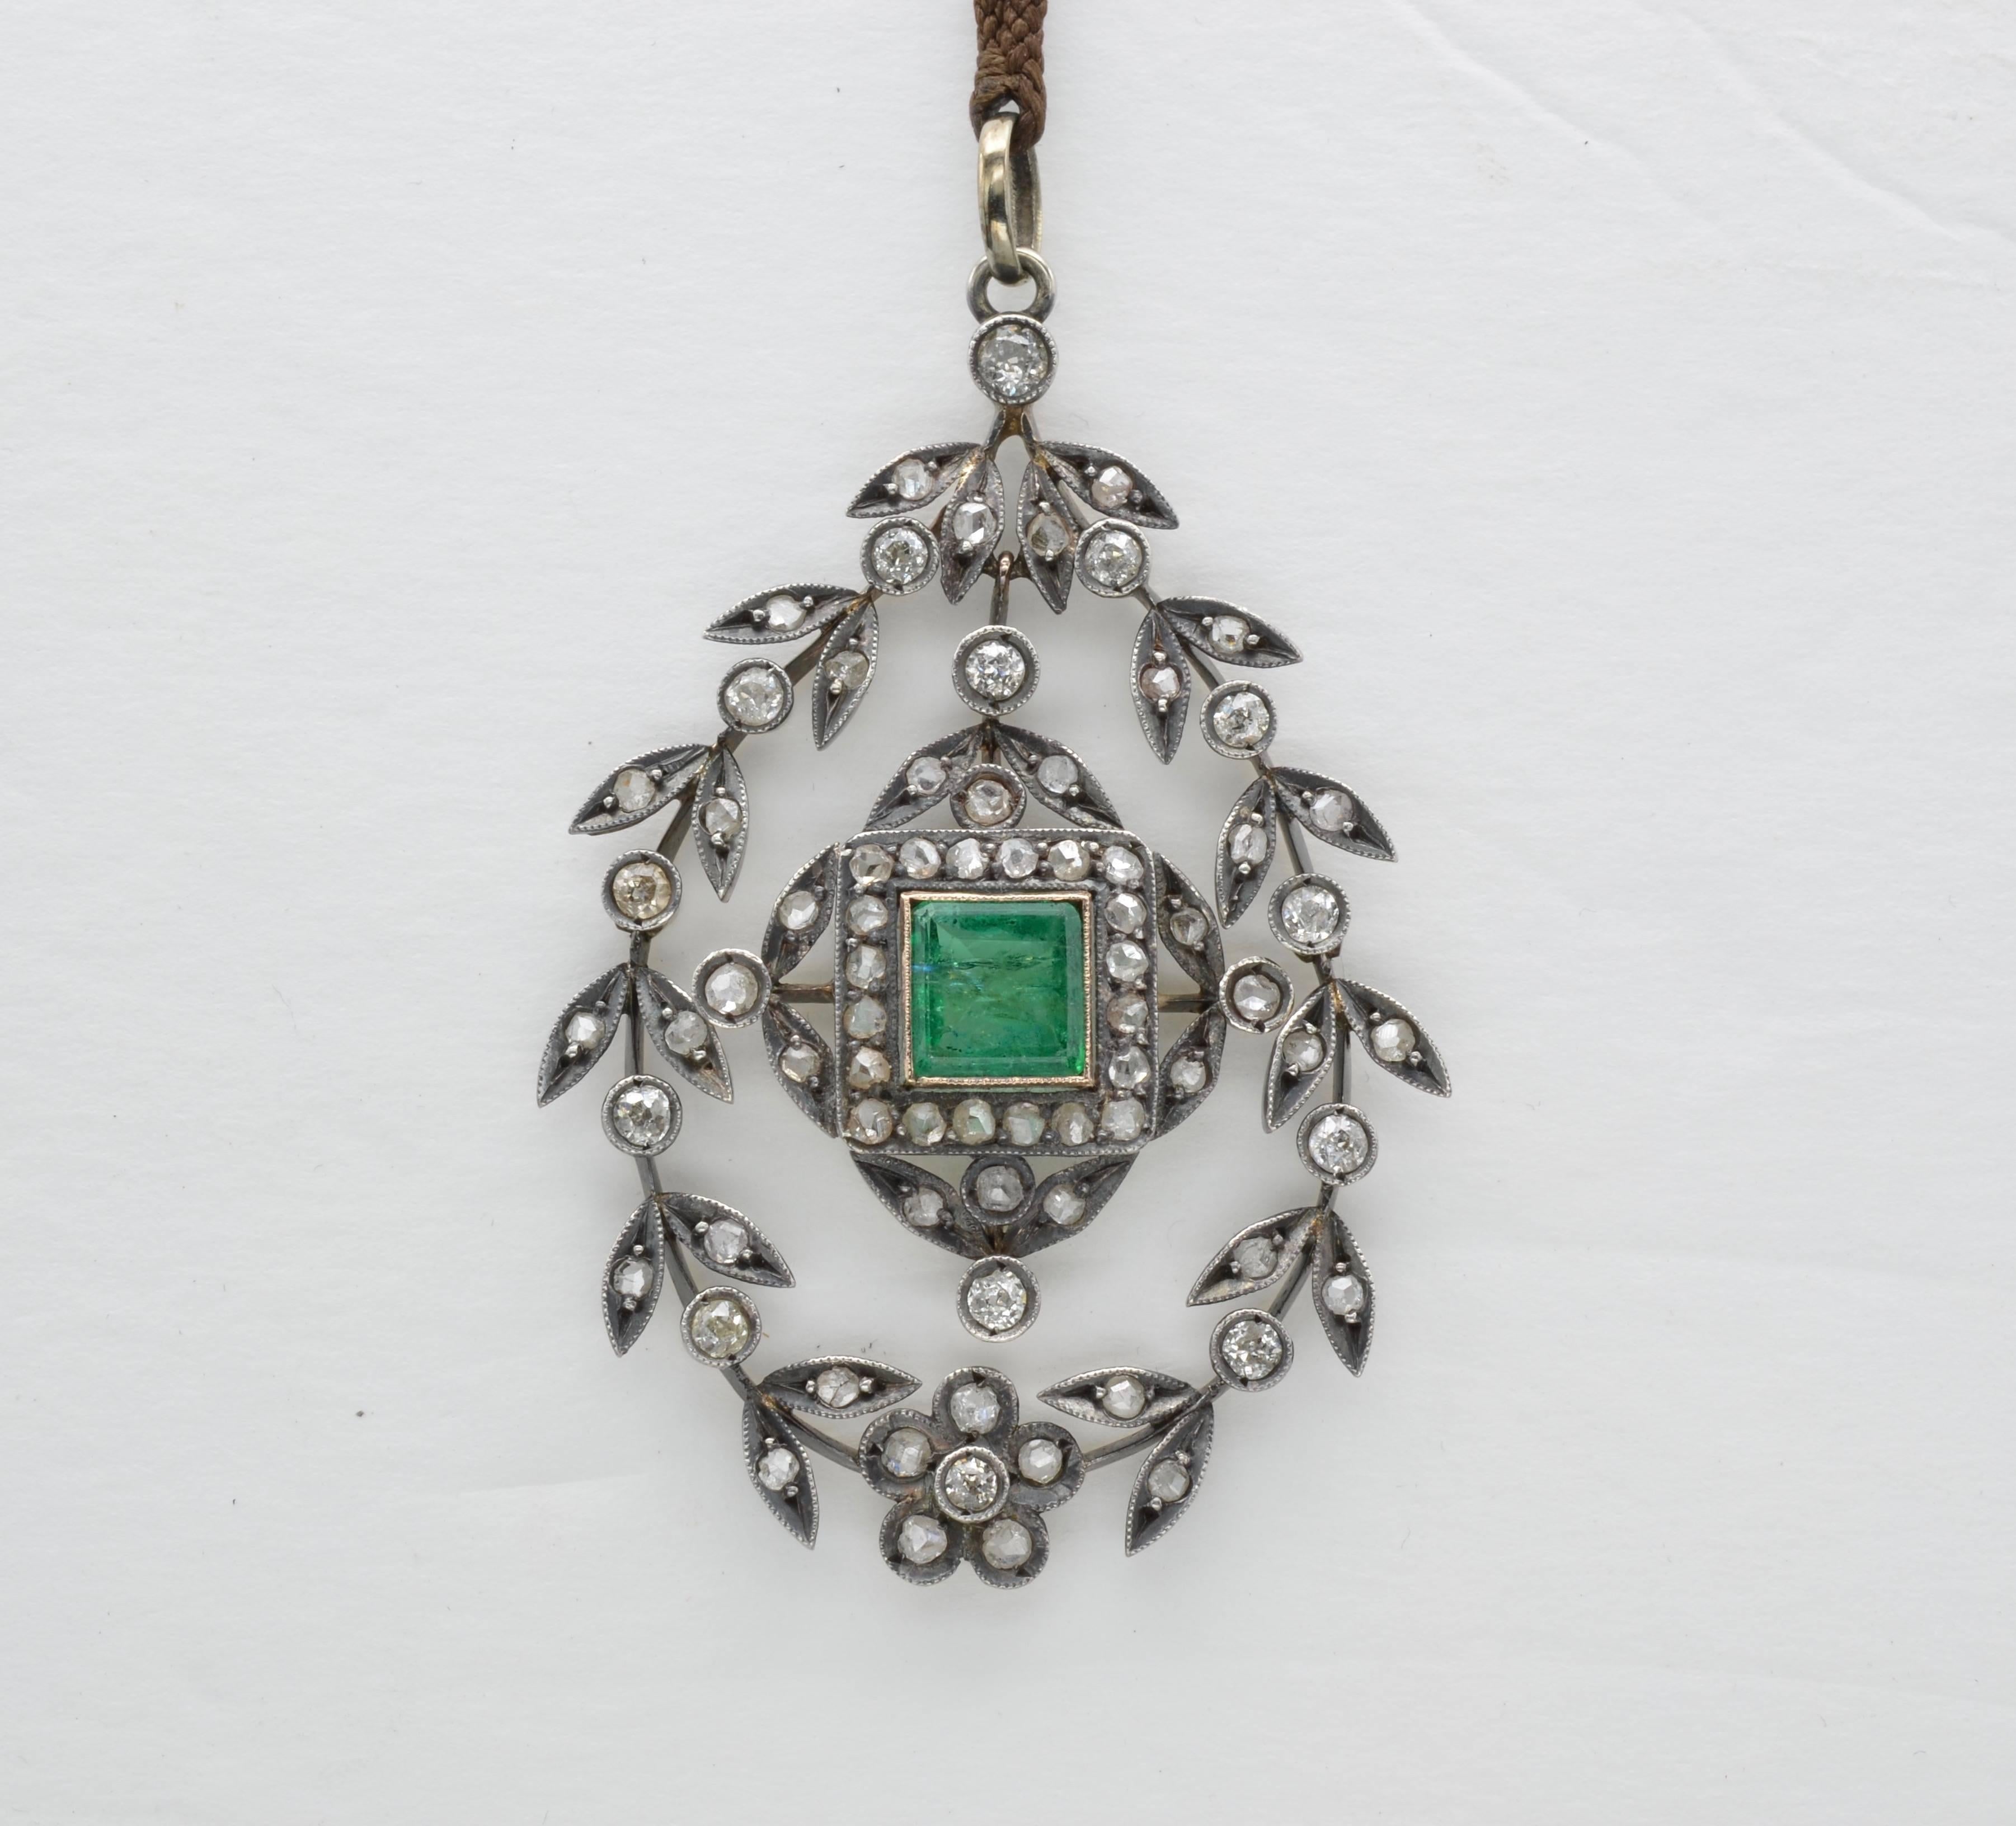 This large wreath-like pendant is full of old mine cut diamonds and a hinge in the middle to create a swinging movement.  A large bright green emerald glows in the center with horizontal inclusions and historical allure. It is on a braided cord so